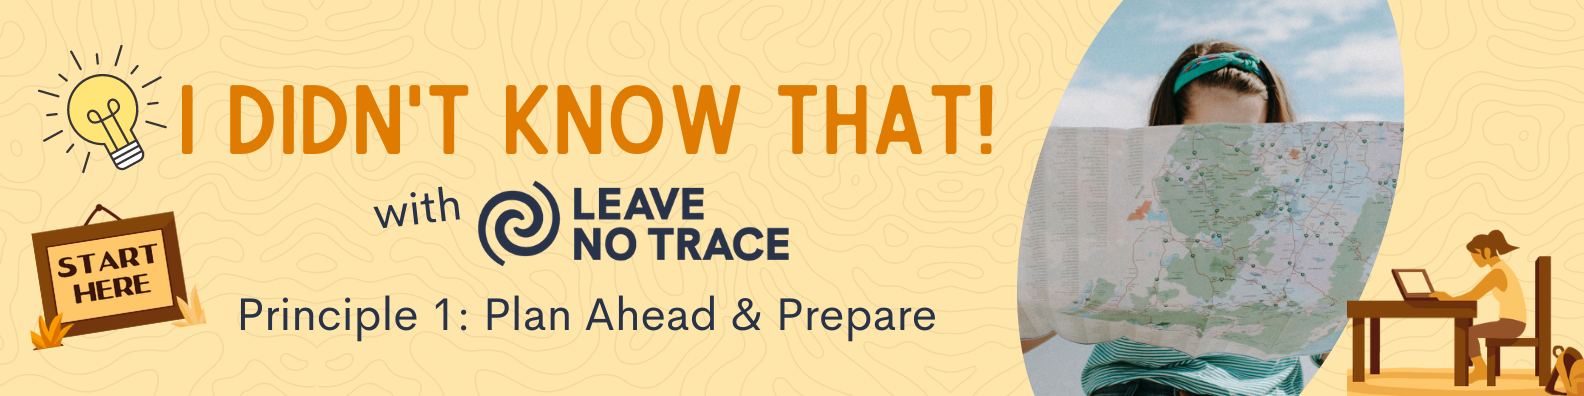 Article banner for "I Didn't Know That! with Leave No Trace Principle 1: Plan Ahead and Prepare" with image of person looking at a map